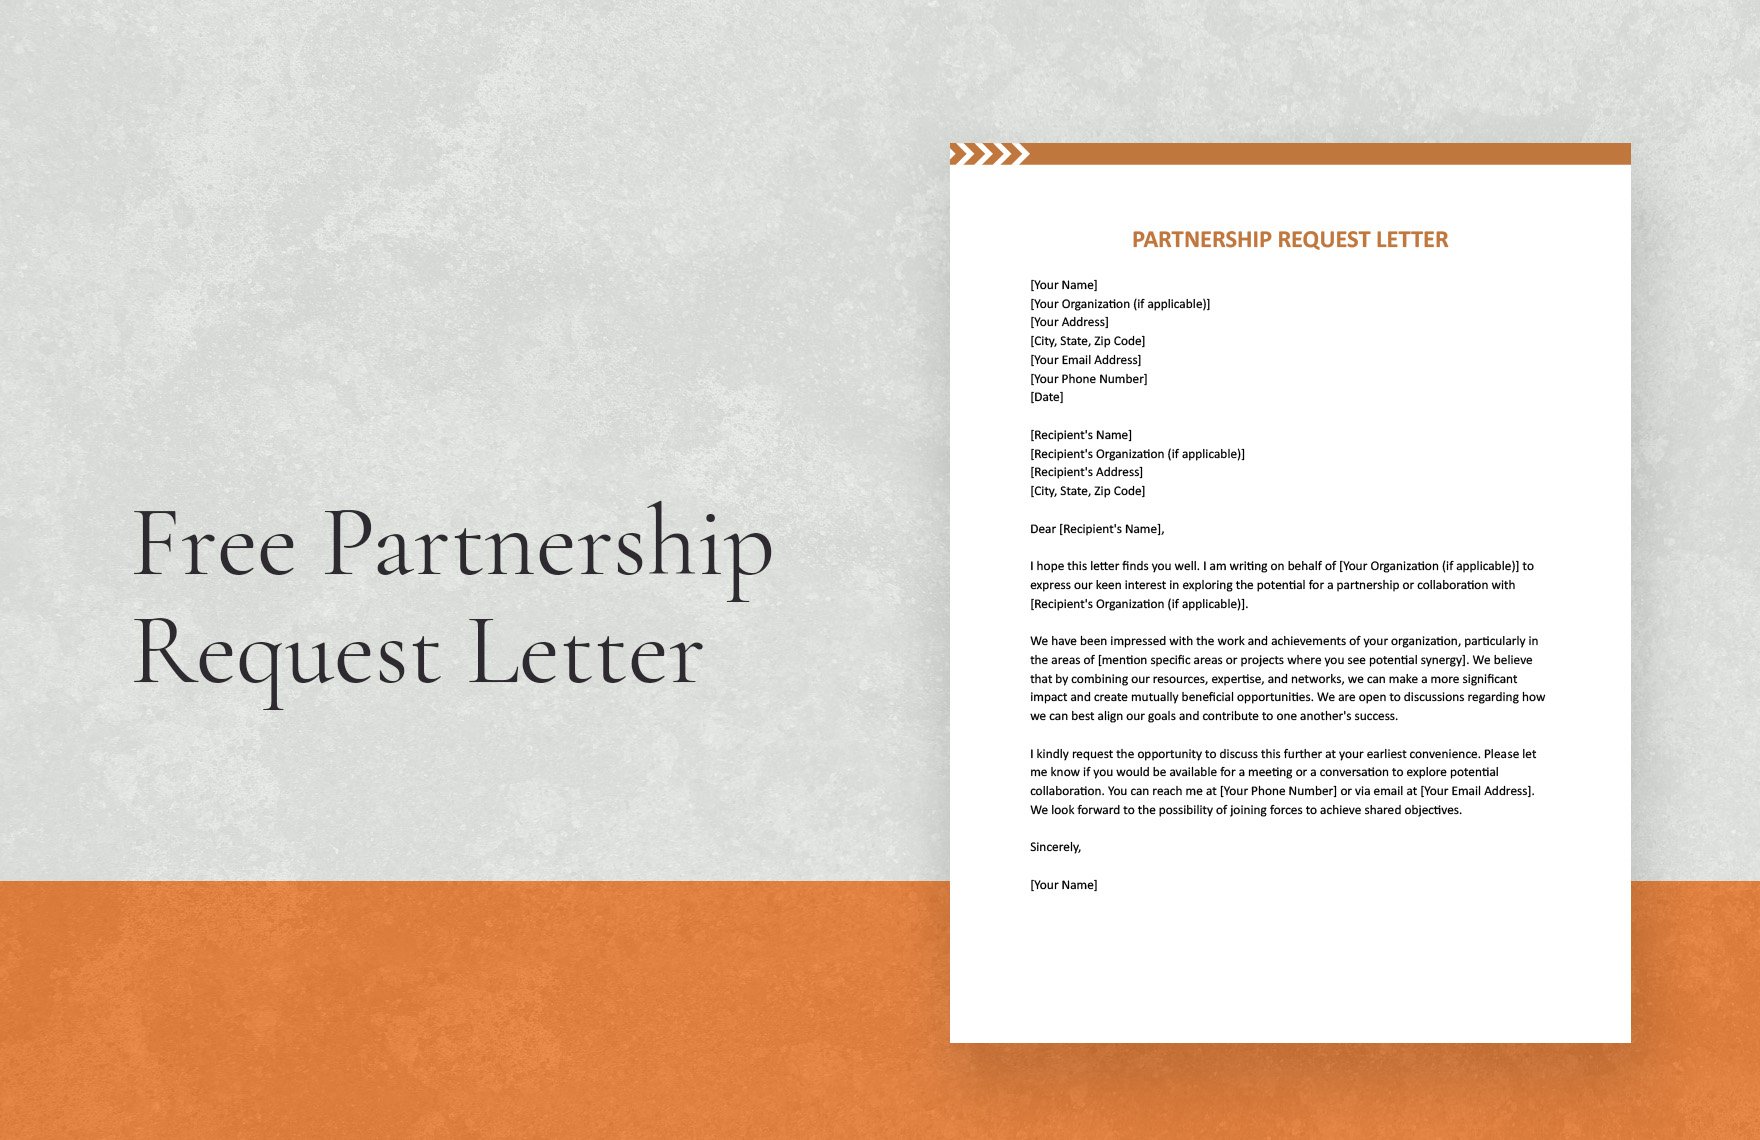 Free Partnership Request Letter